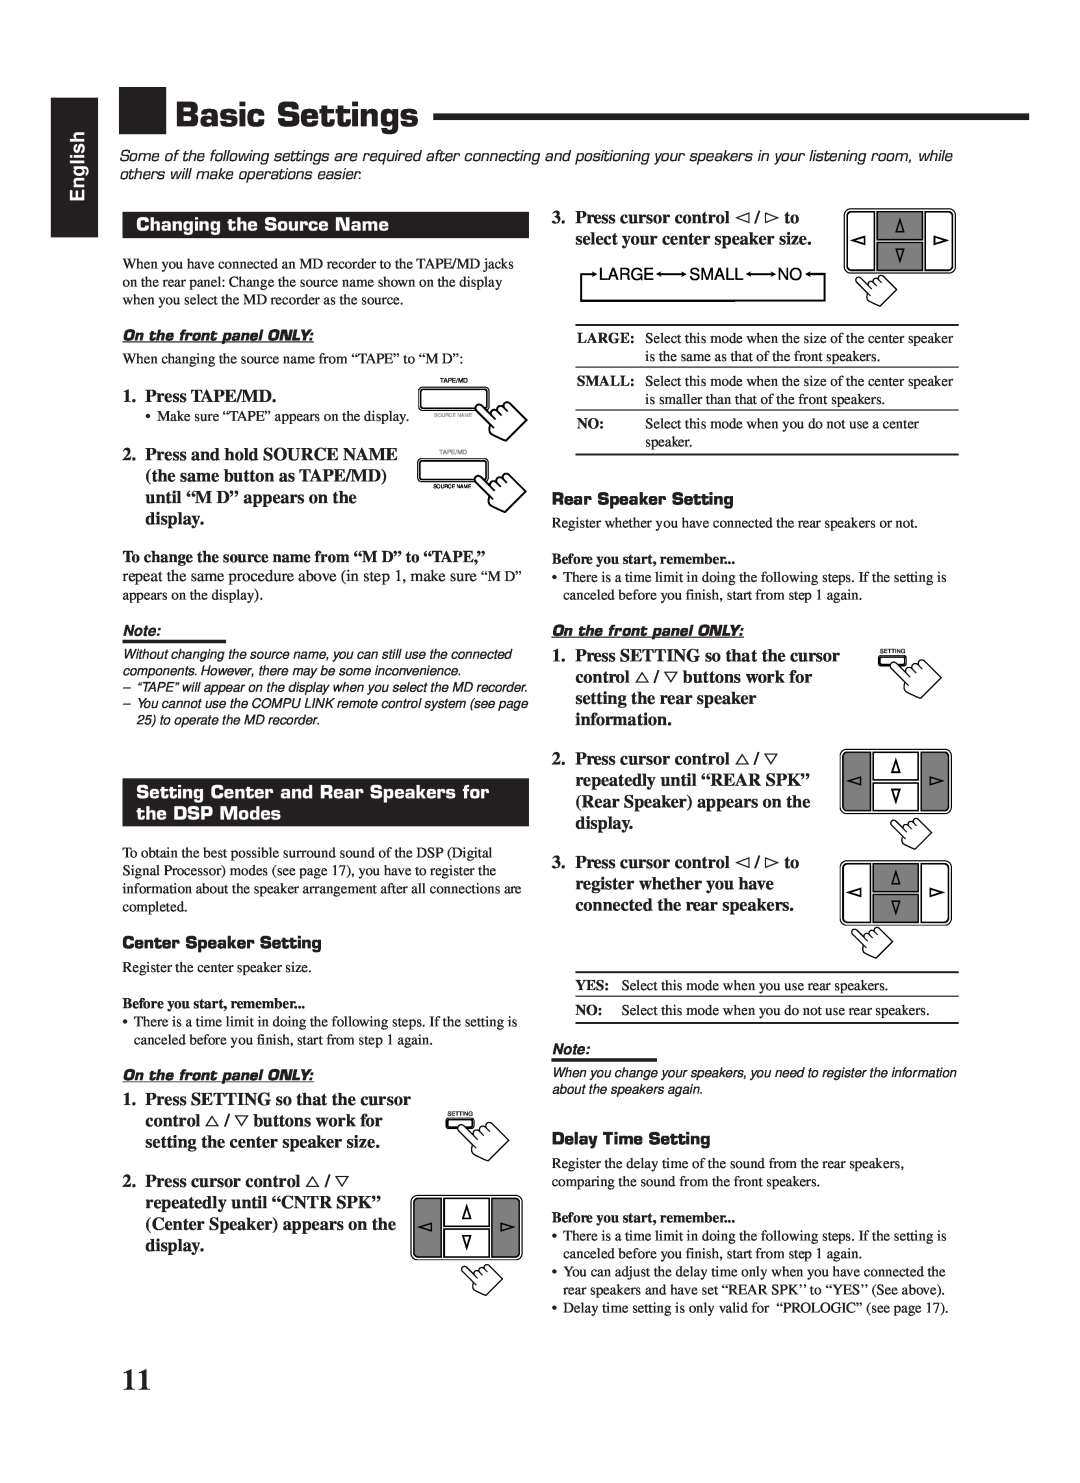 JVC RX-558RBK manual Basic Settings, Changing the Source Name, Setting Center and Rear Speakers for, the DSP Modes, English 